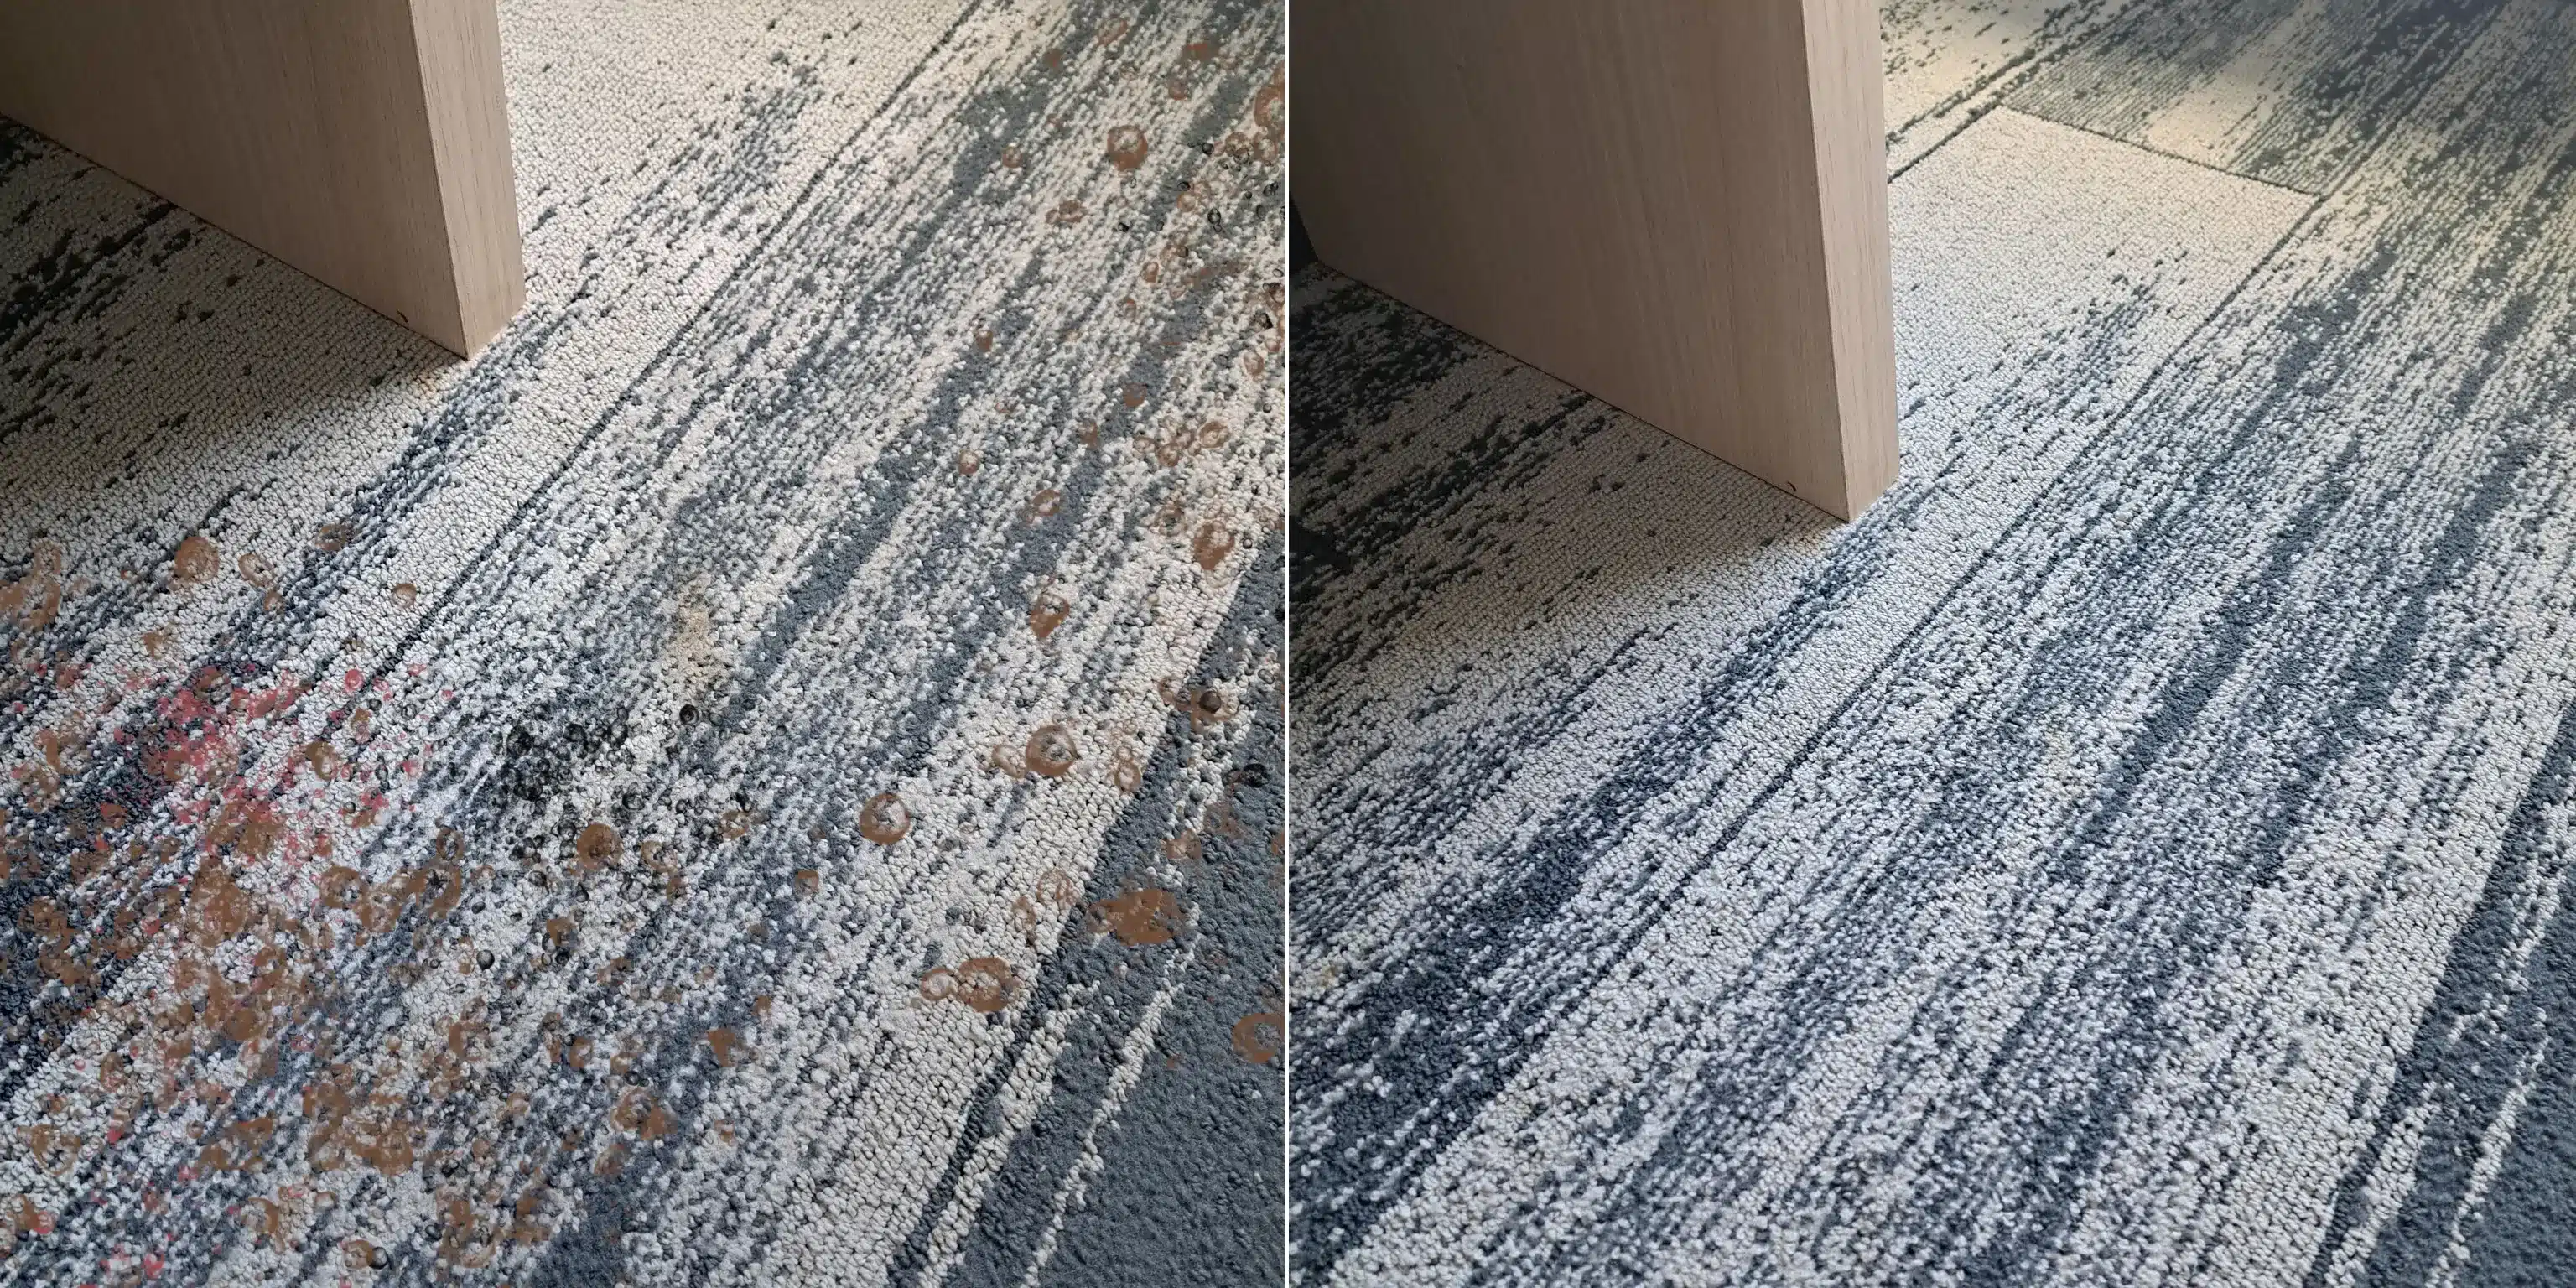 Carpet Cleaning Near Me Gainesville, FL -Dirt Carpet vs Clean Before and after